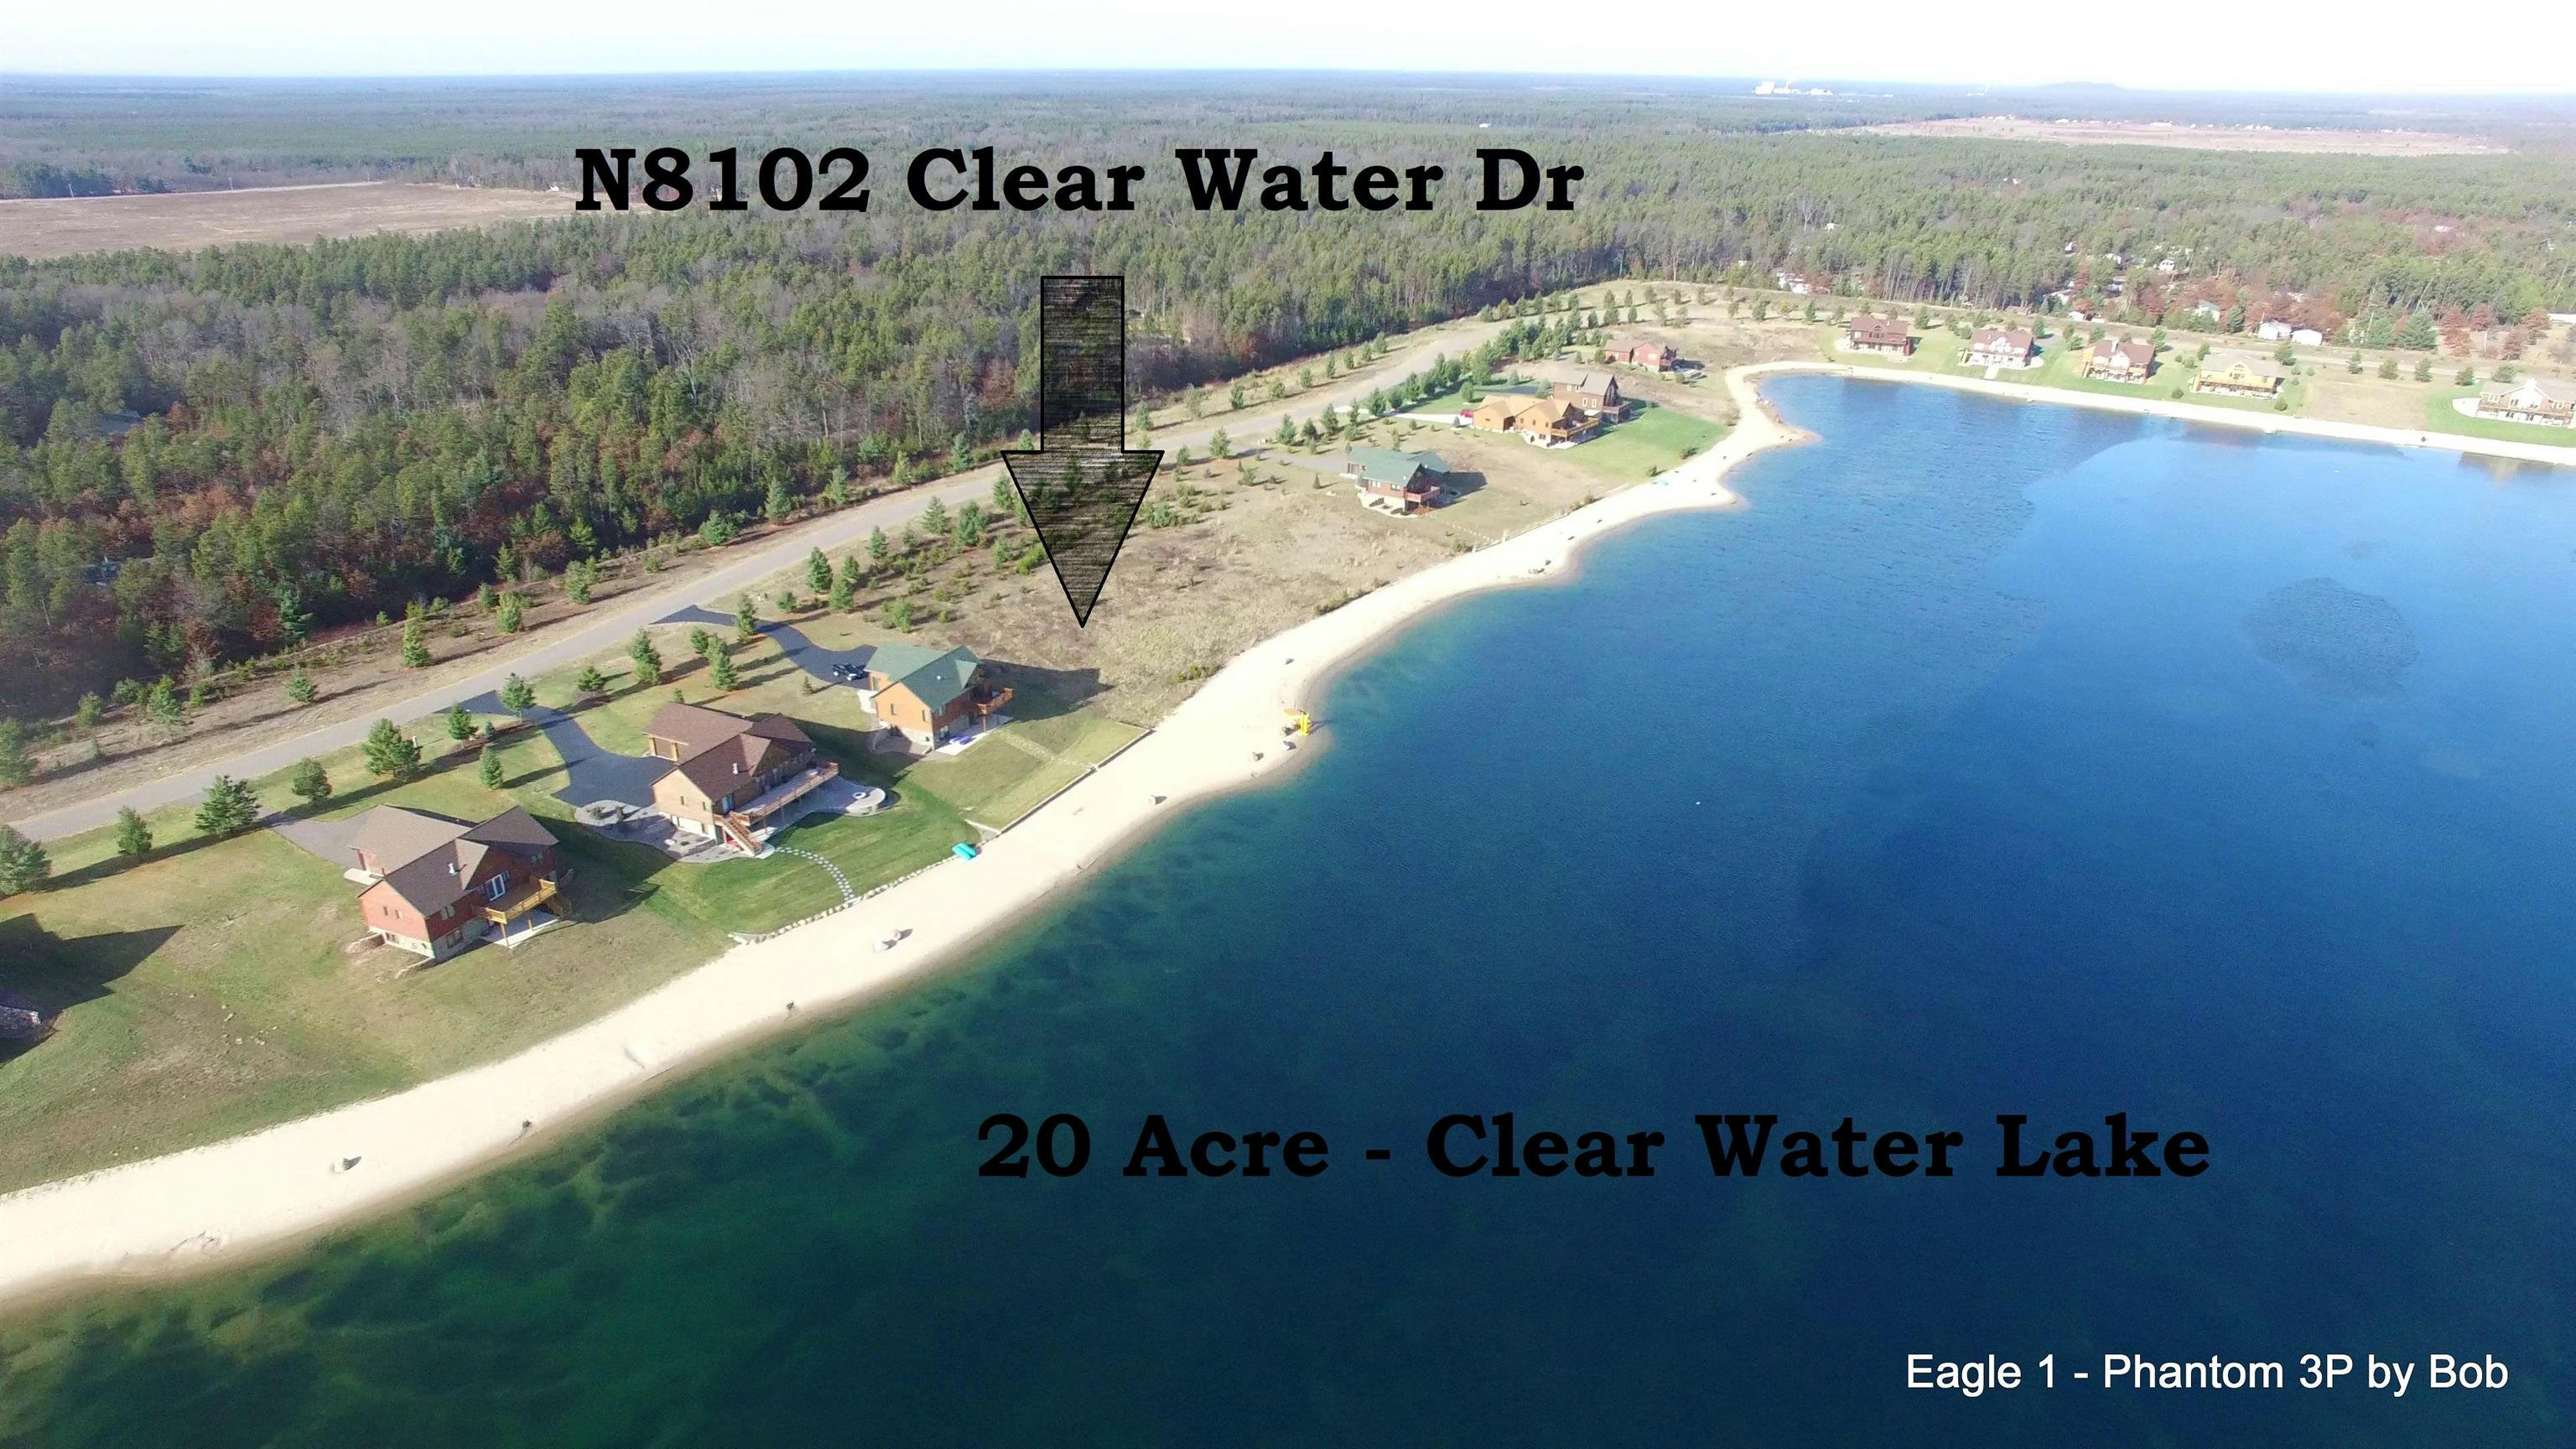 N8102 CLEAR WATER DR